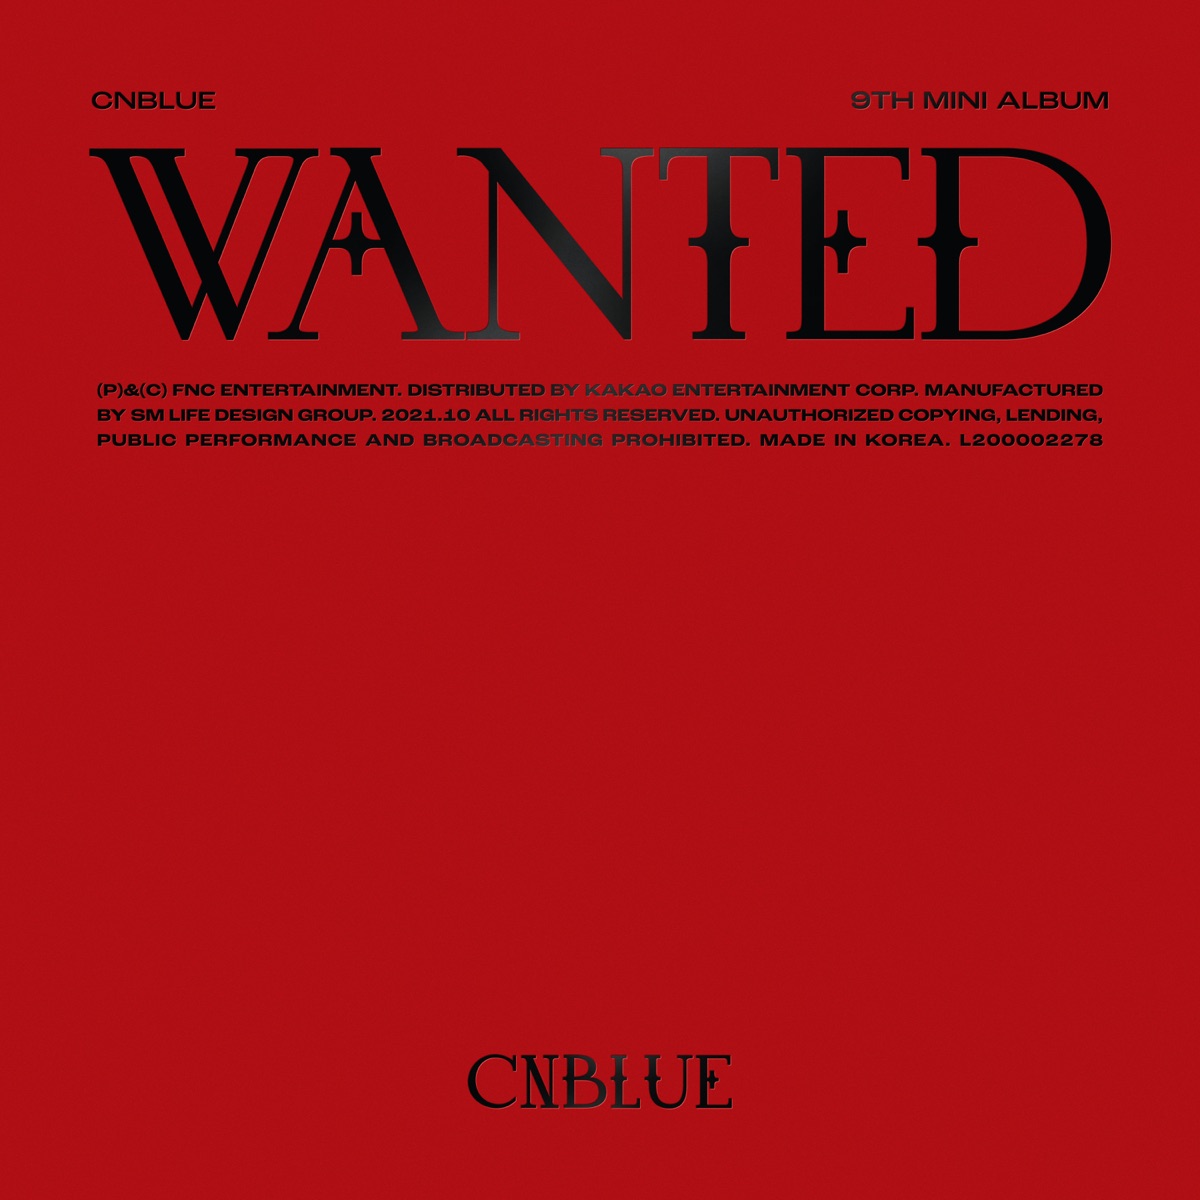 『CNBLUE - Nothing』収録の『WANTED』ジャケット